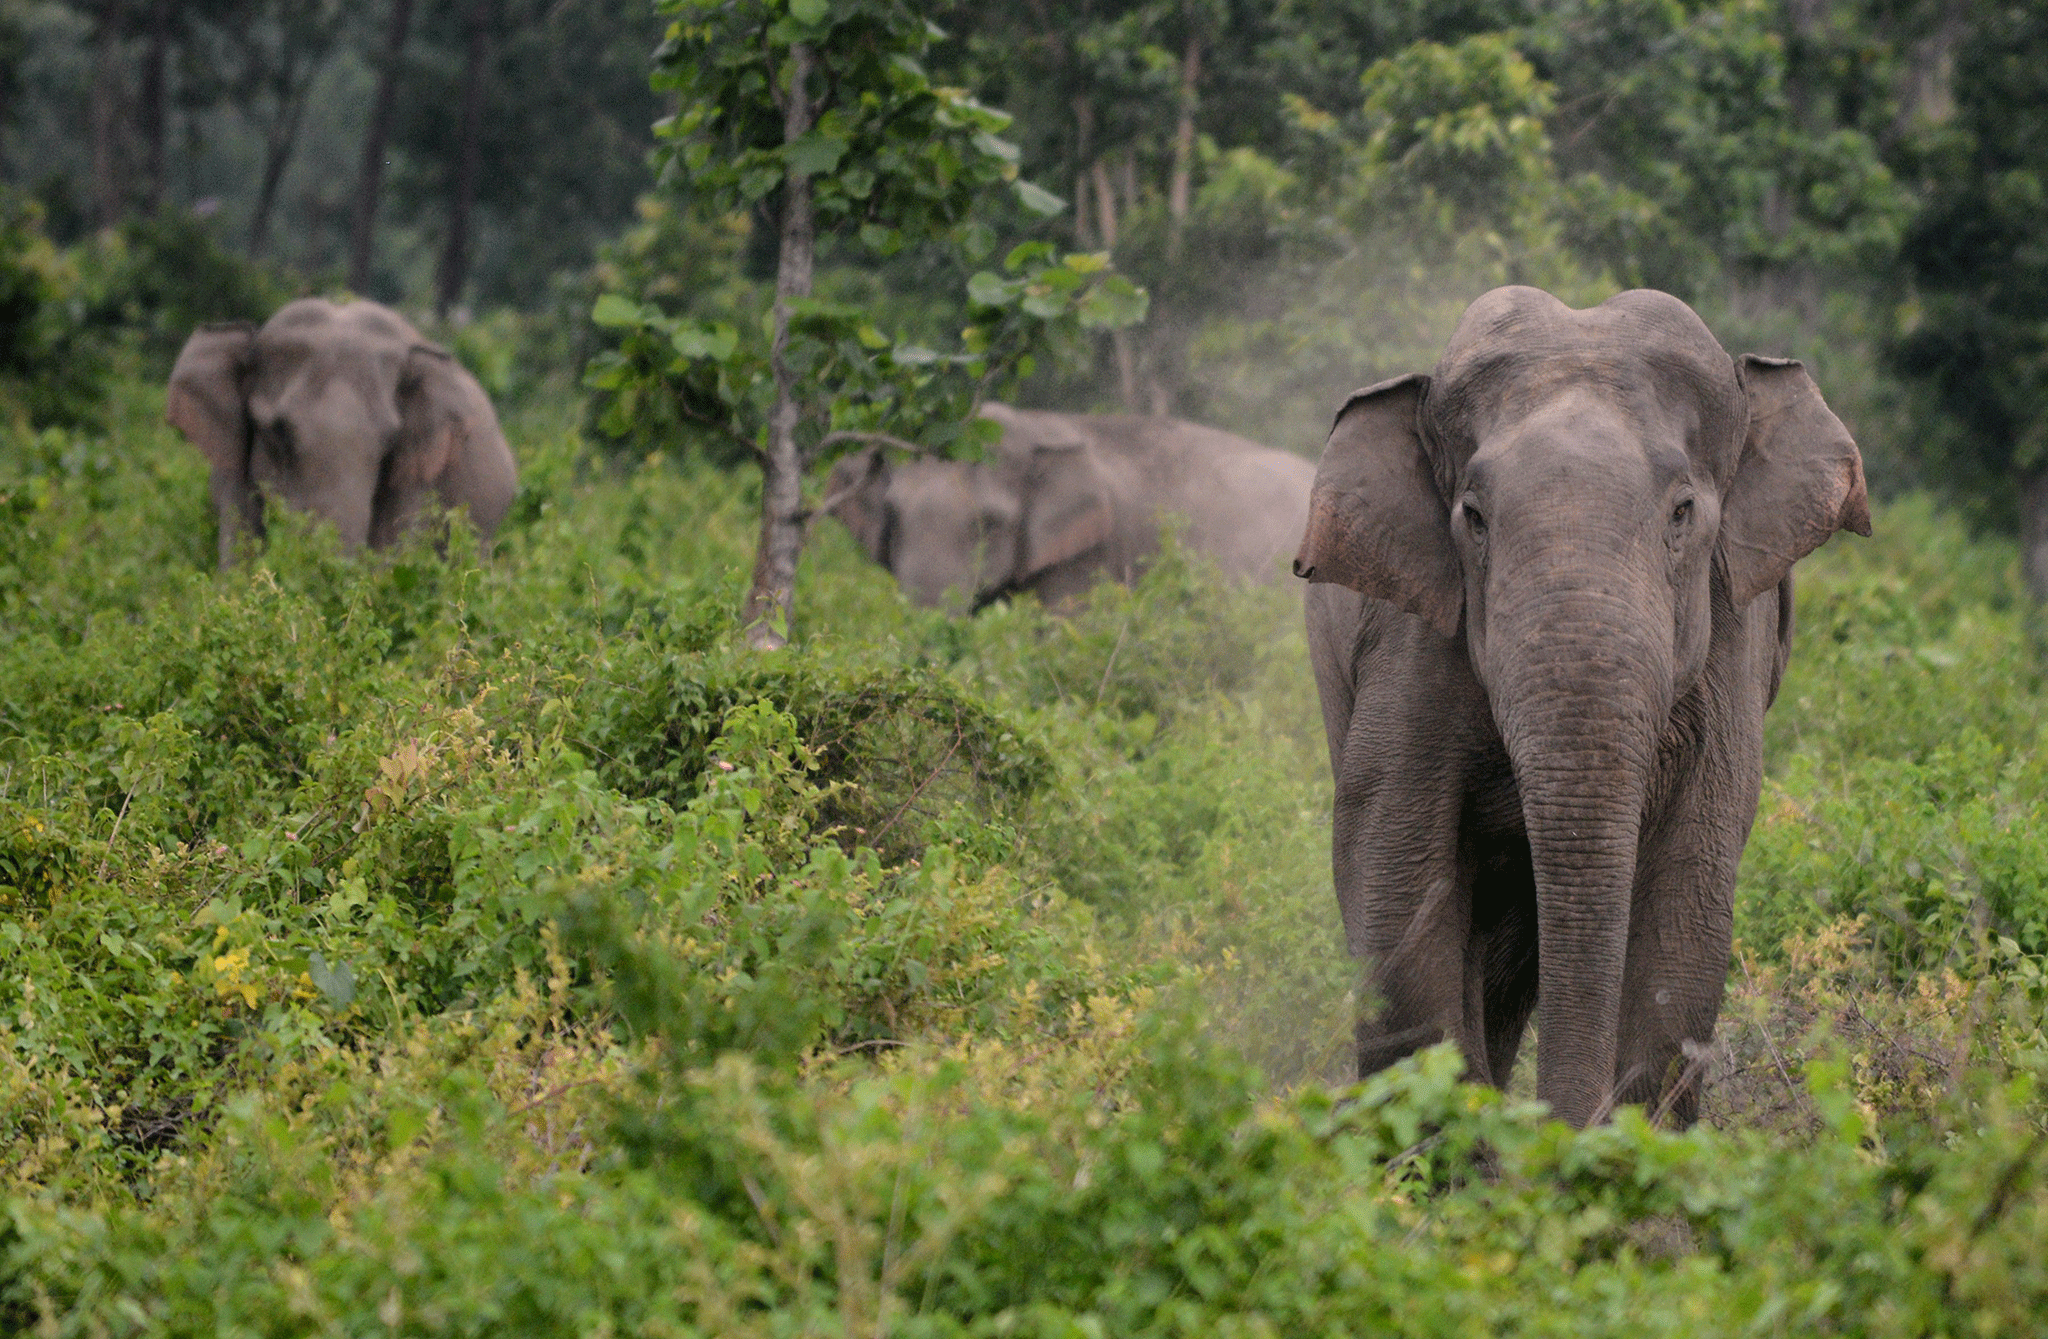 Forest elephants are now mainly found in Gabon